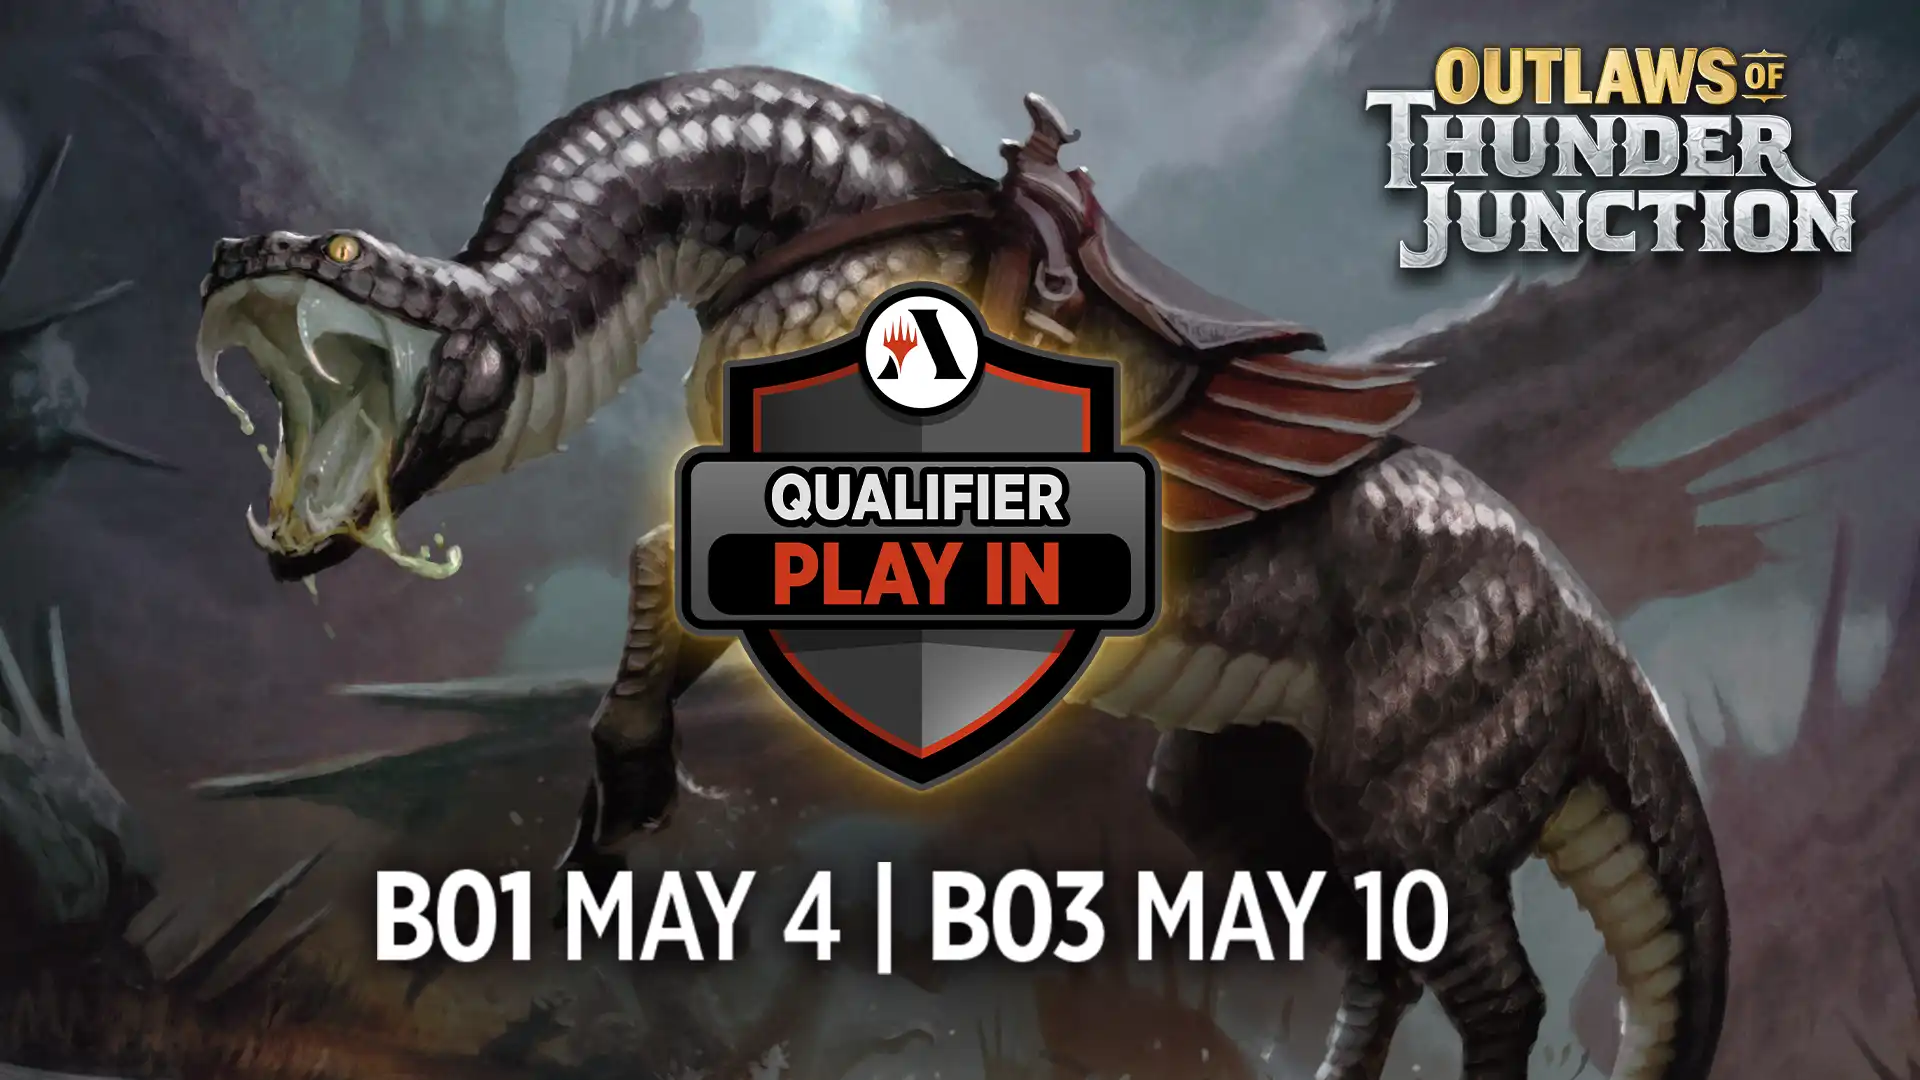 A part-snake, part-horse creature, saddled and rearing, with the text Qualifier Play-In, Best-of-One on May 4, Best-of-Three on May 10